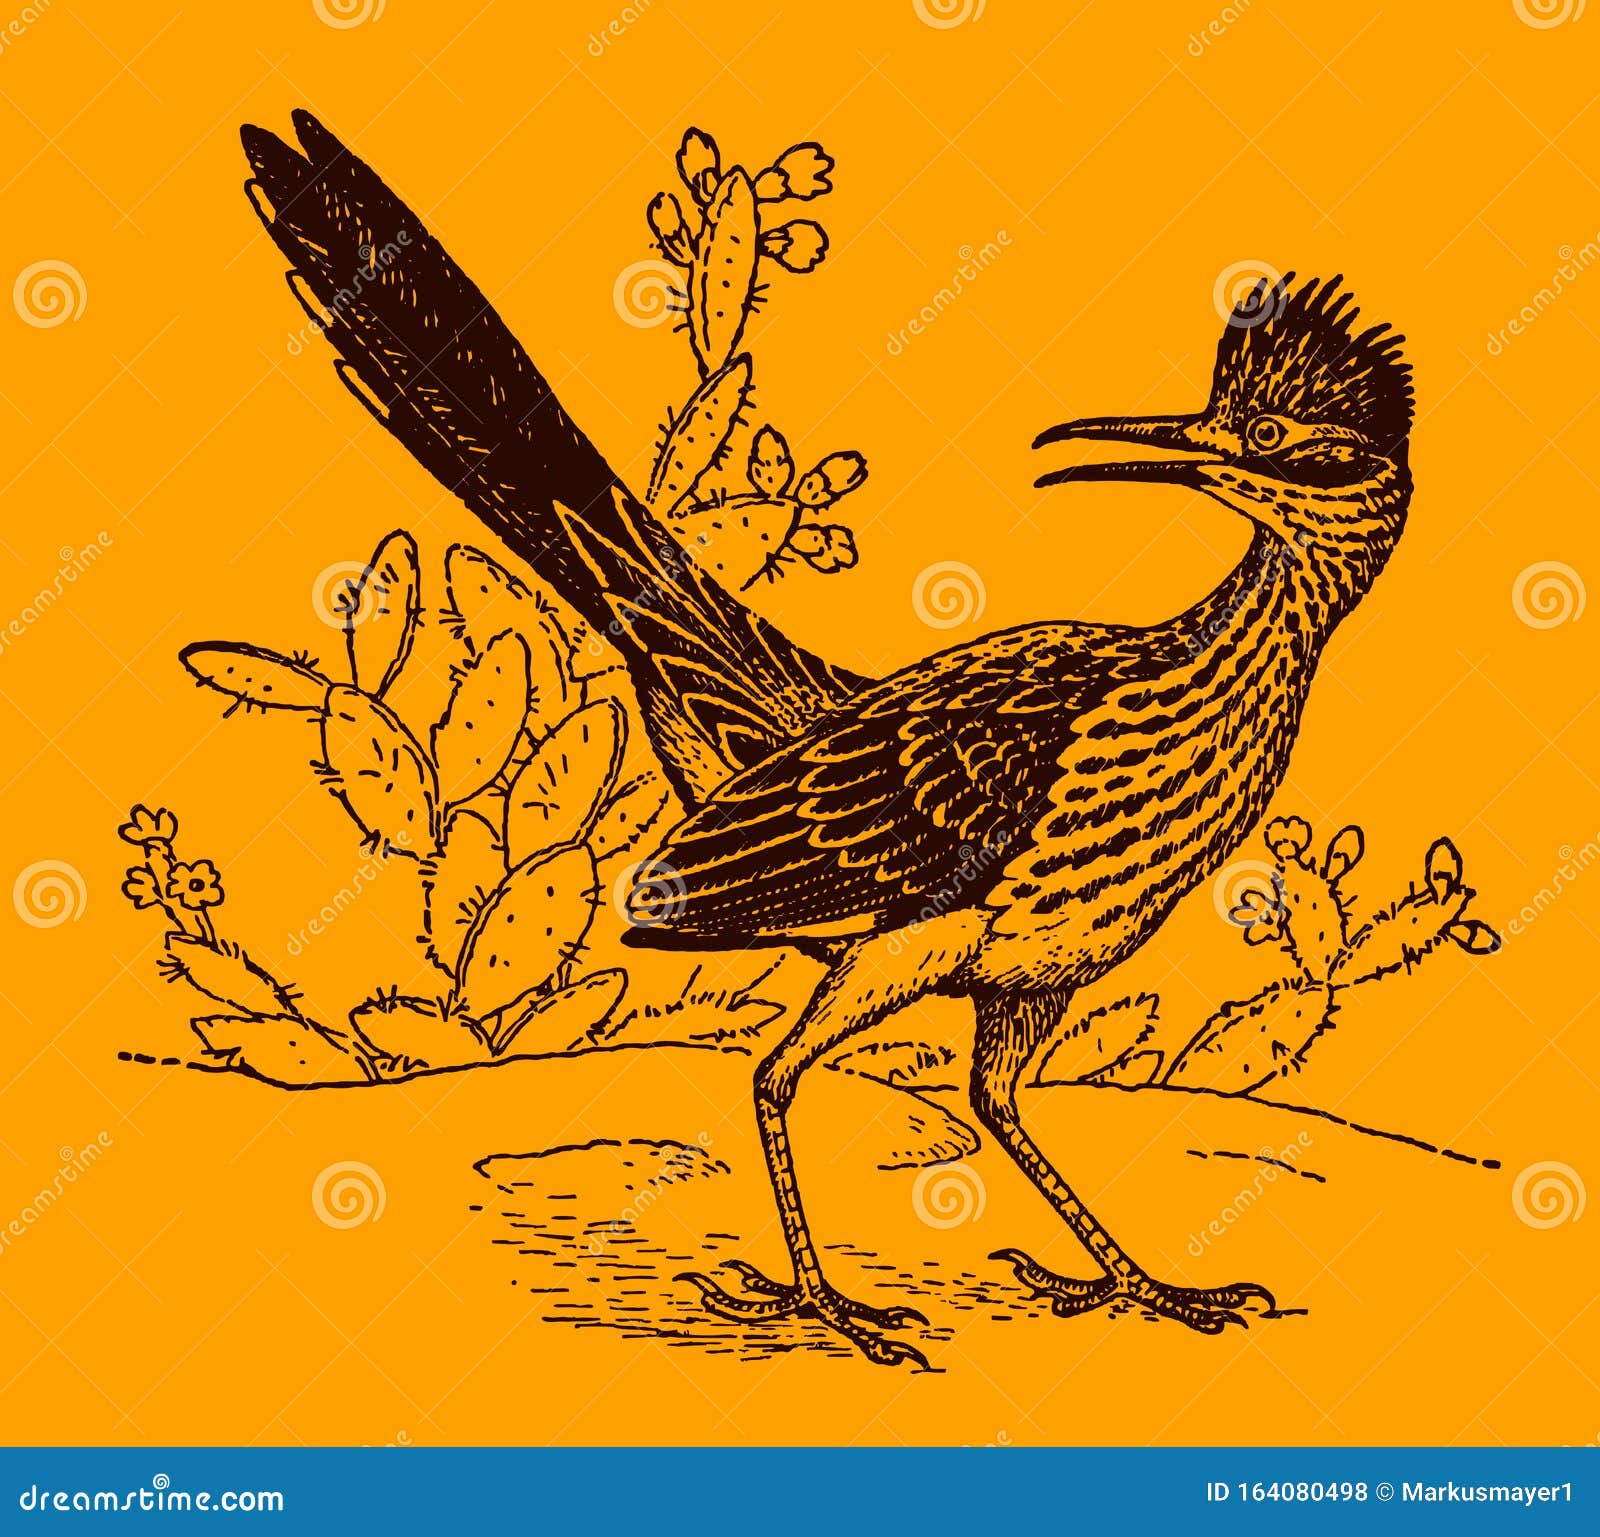 lesser roadrunner geococcyx velox sitting in front of cactus plants and looking backwards, on an orange background